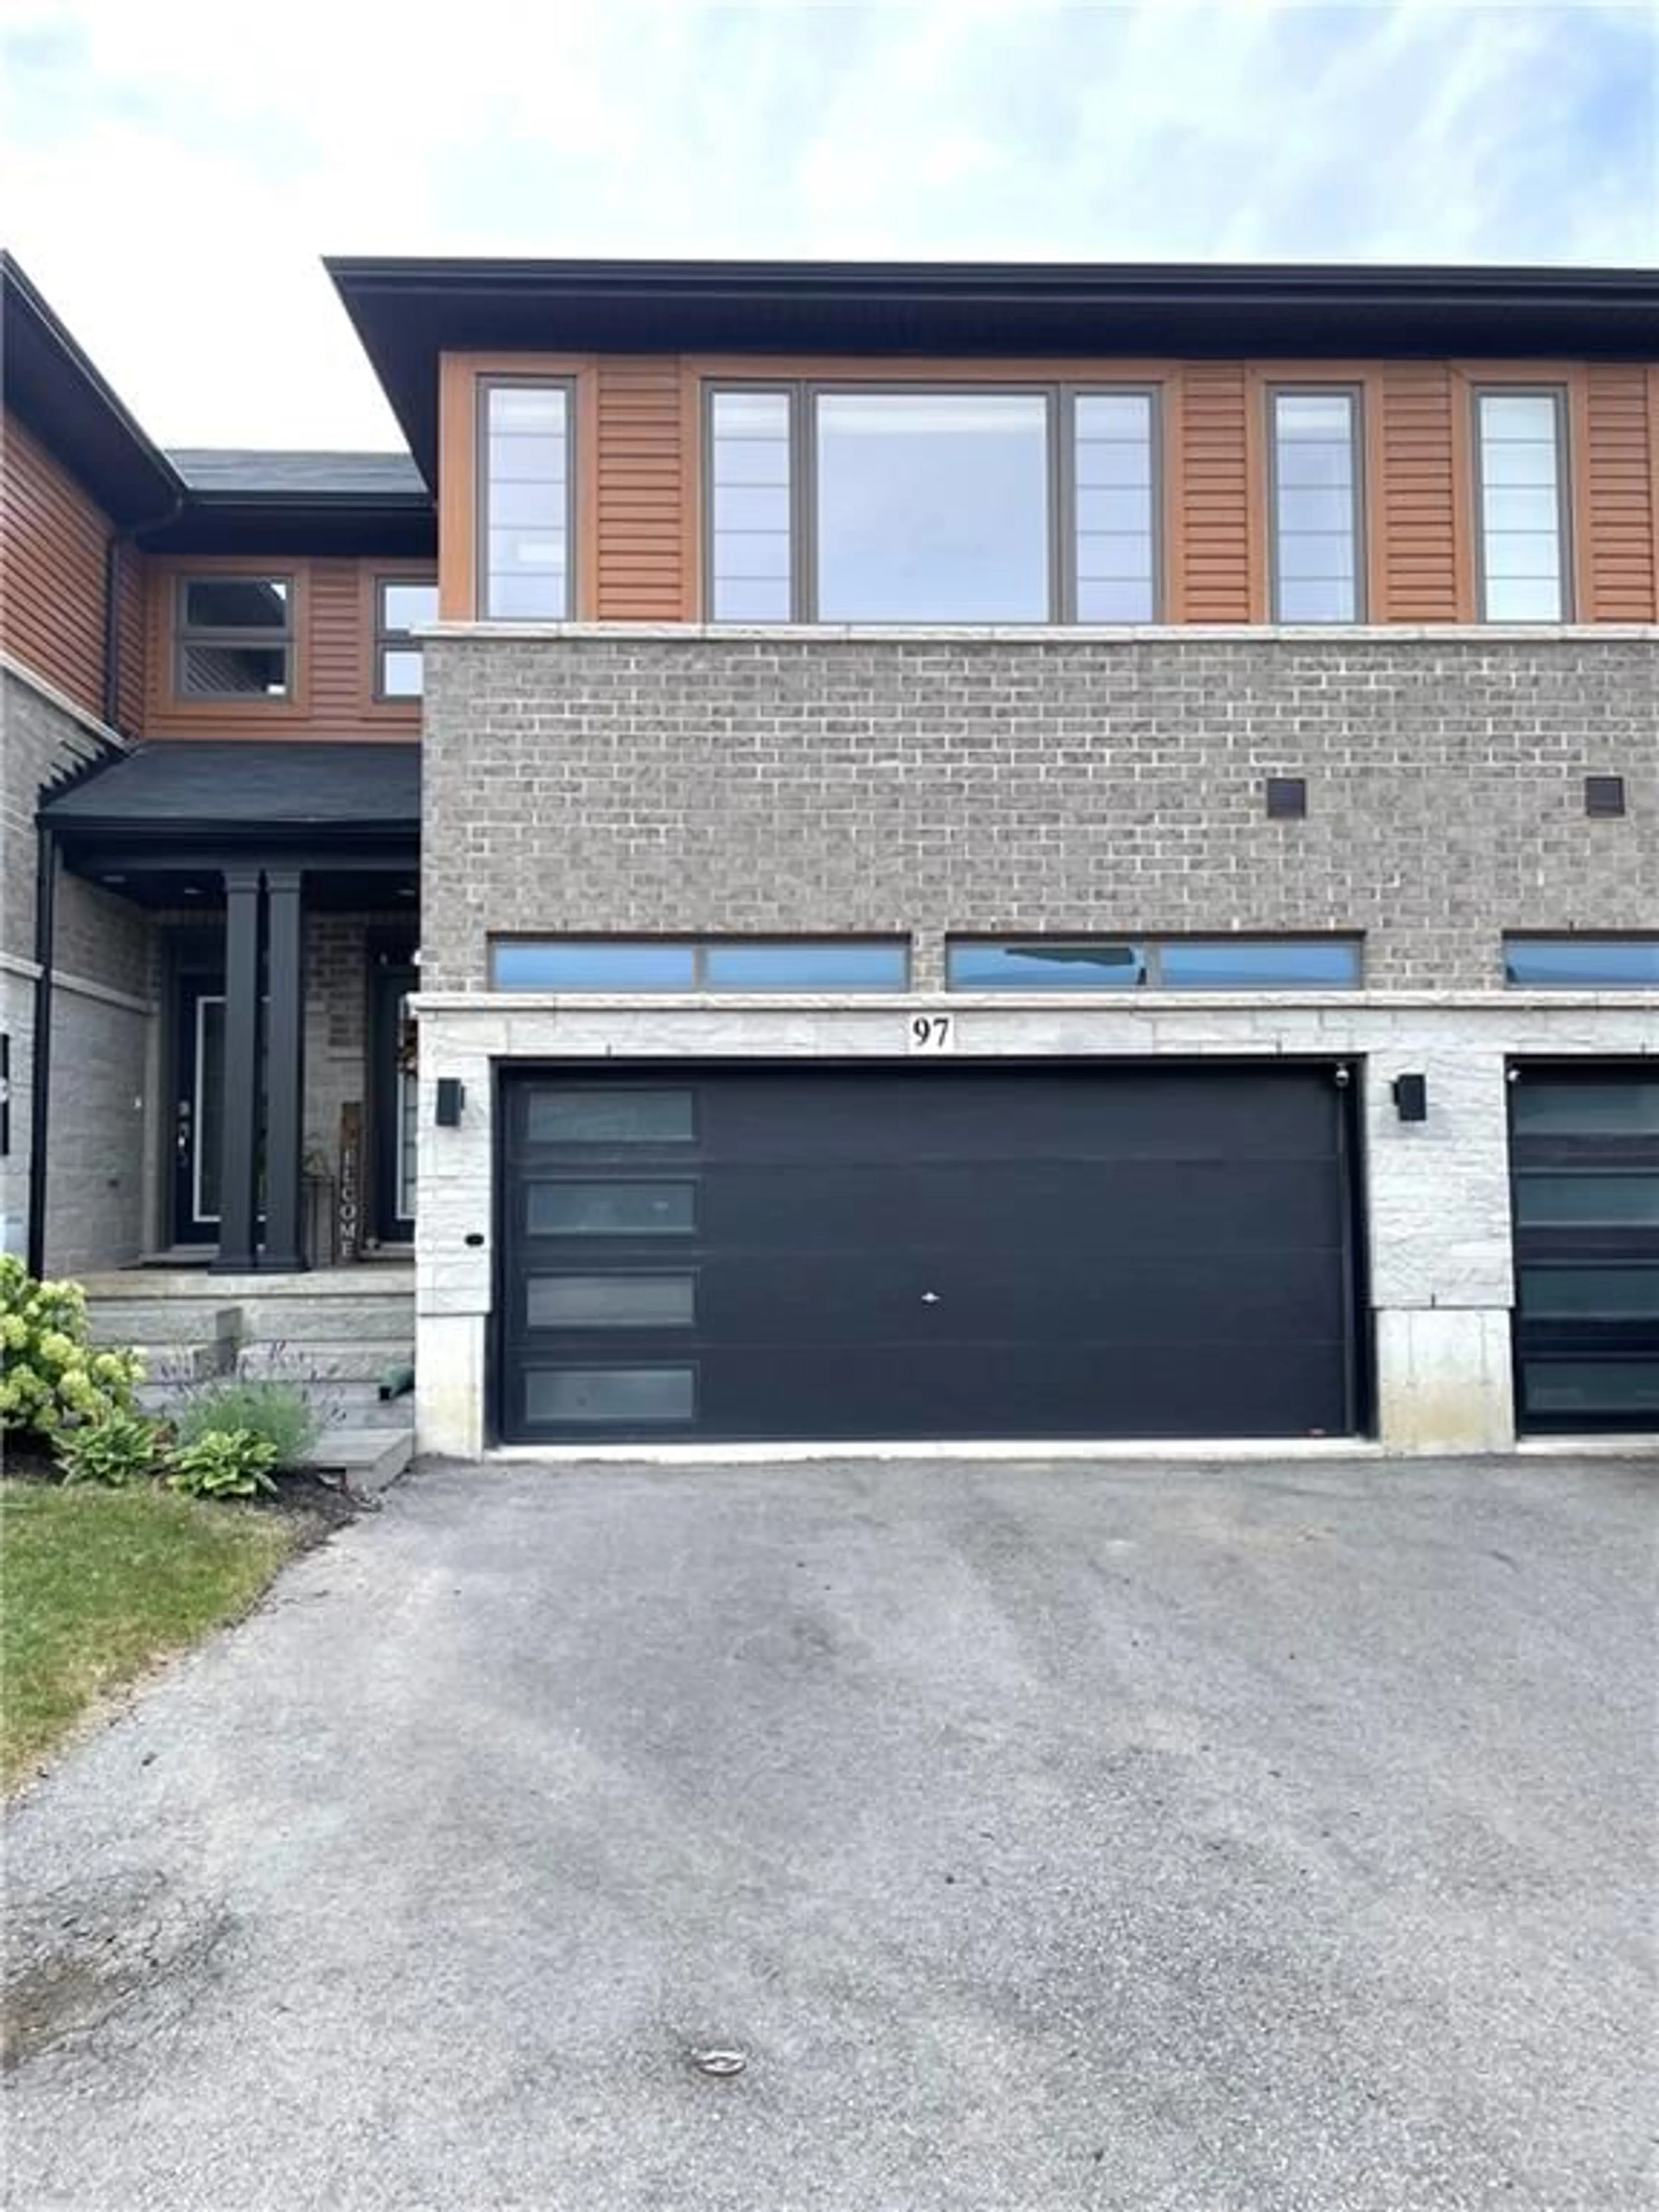 Home with brick exterior material for 97 Greenwich Ave, Stoney Creek Ontario L8J 0L6